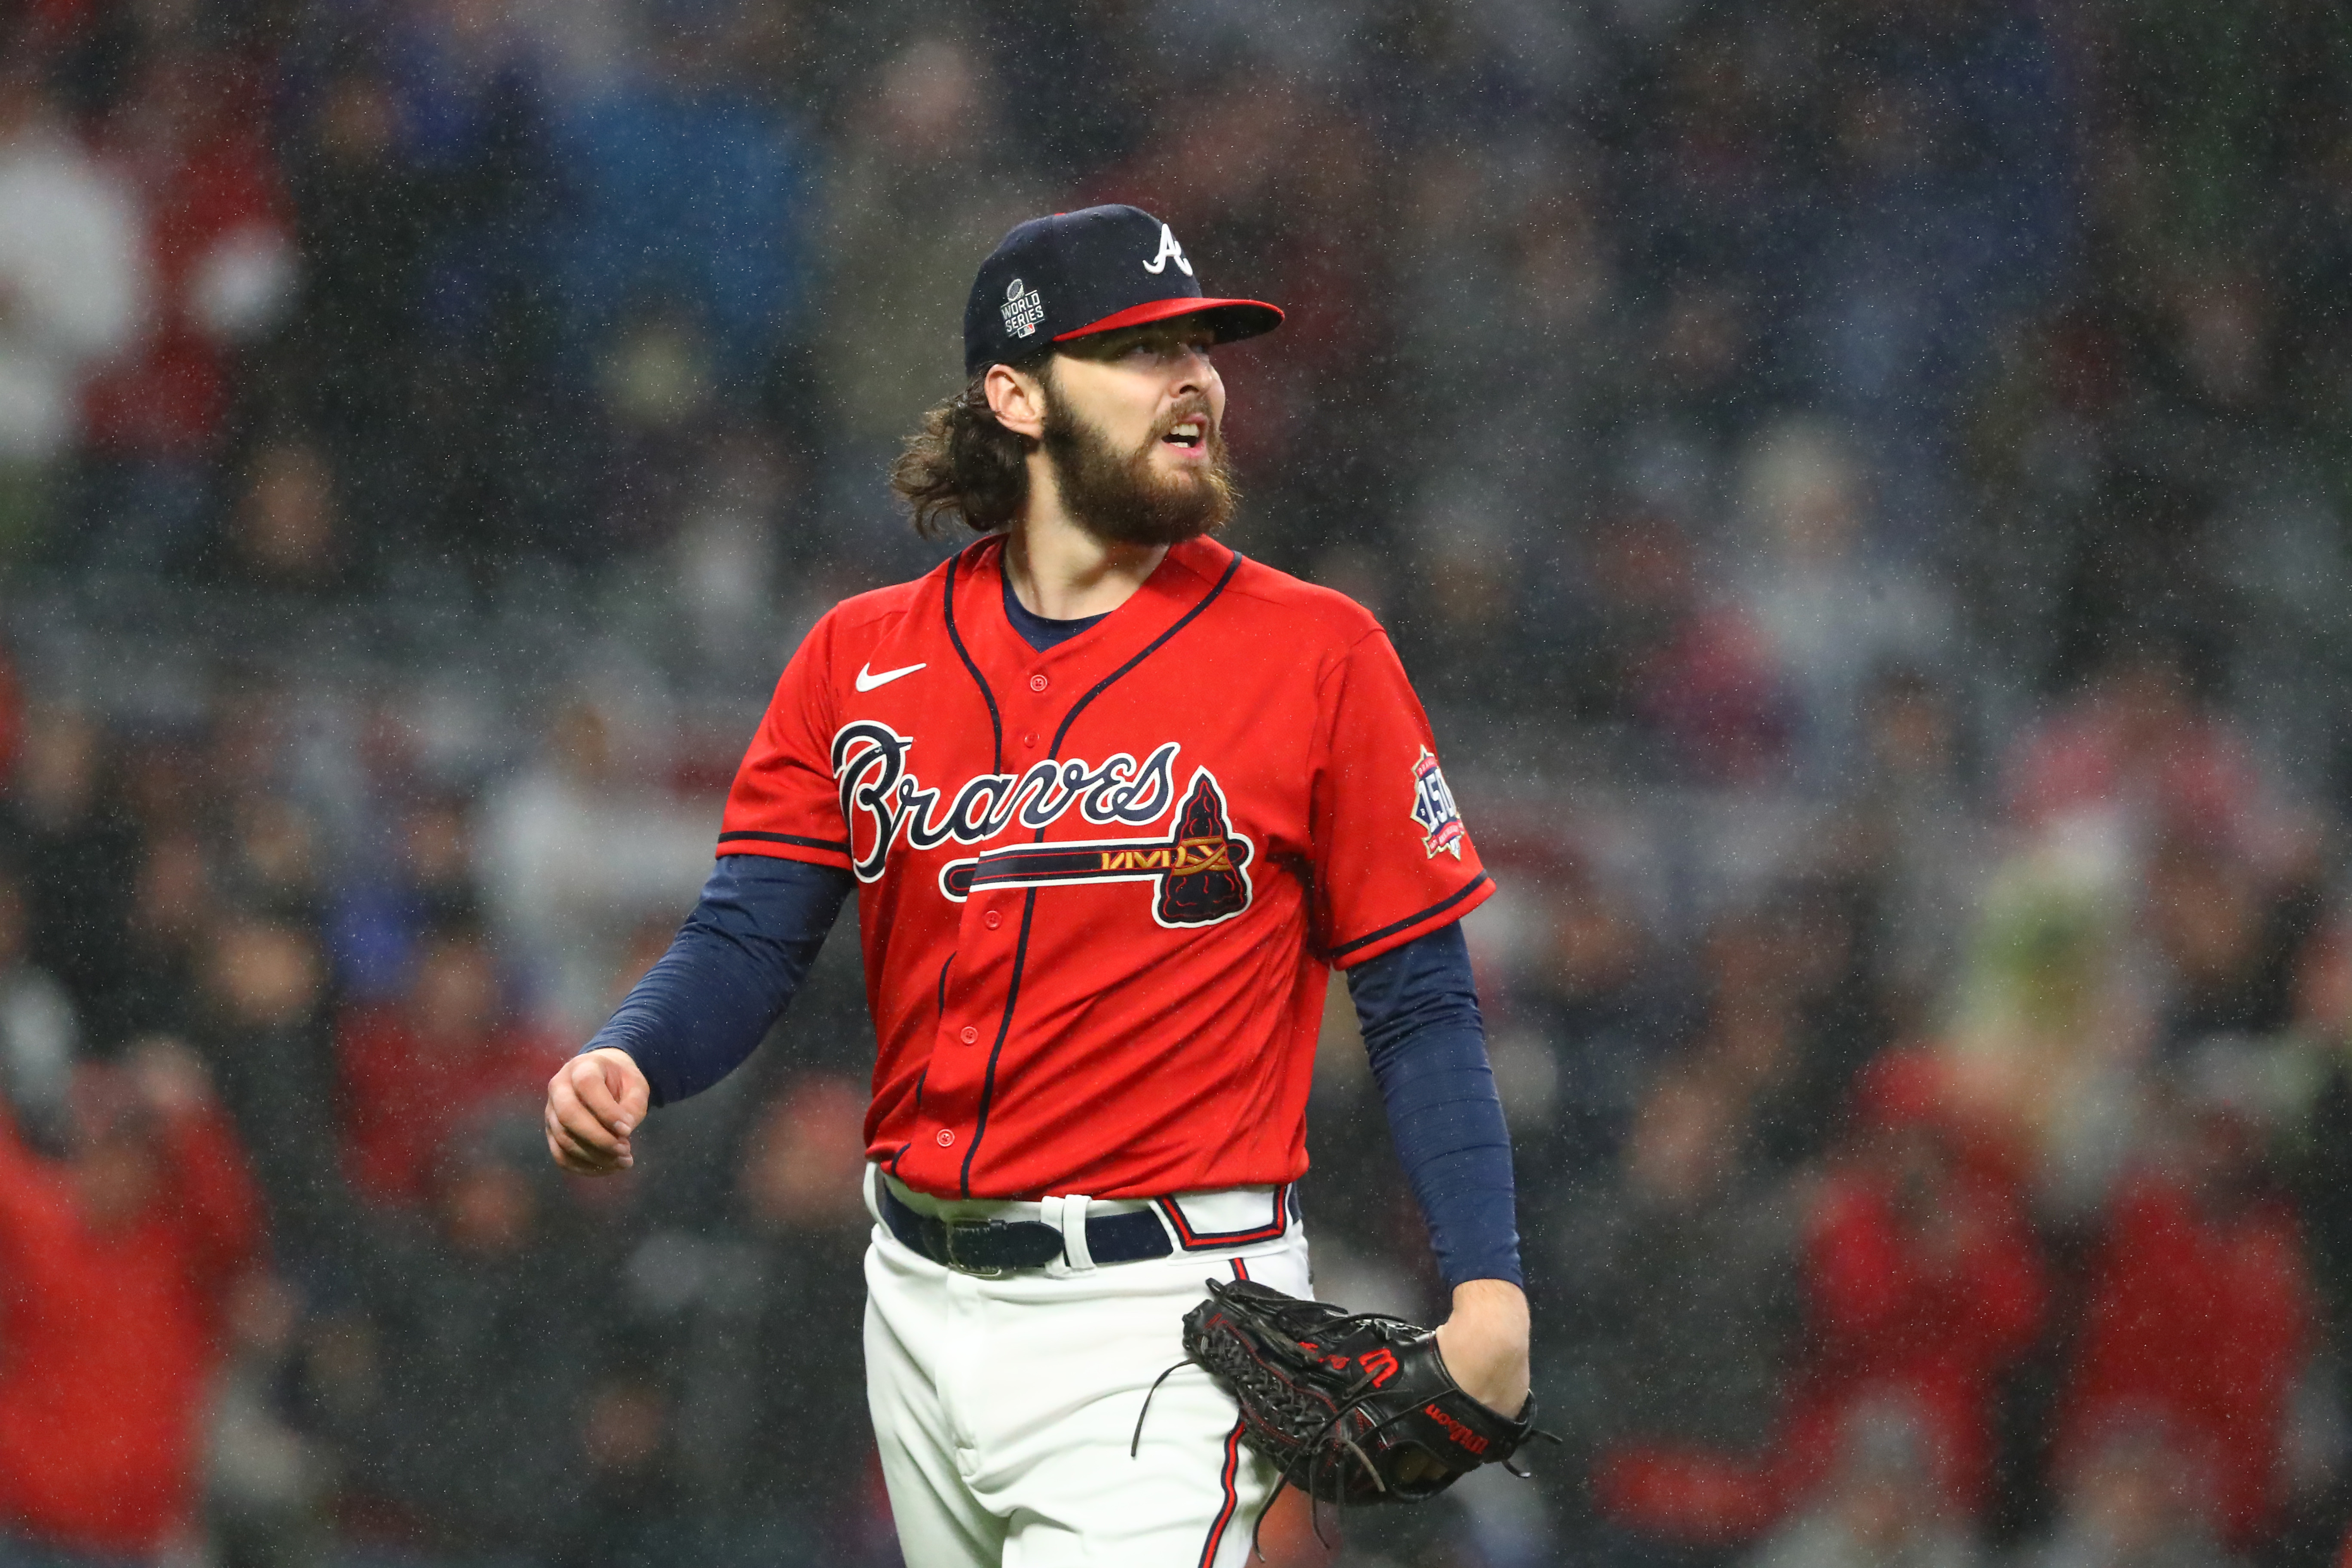 Braves beat Astros to win World Series